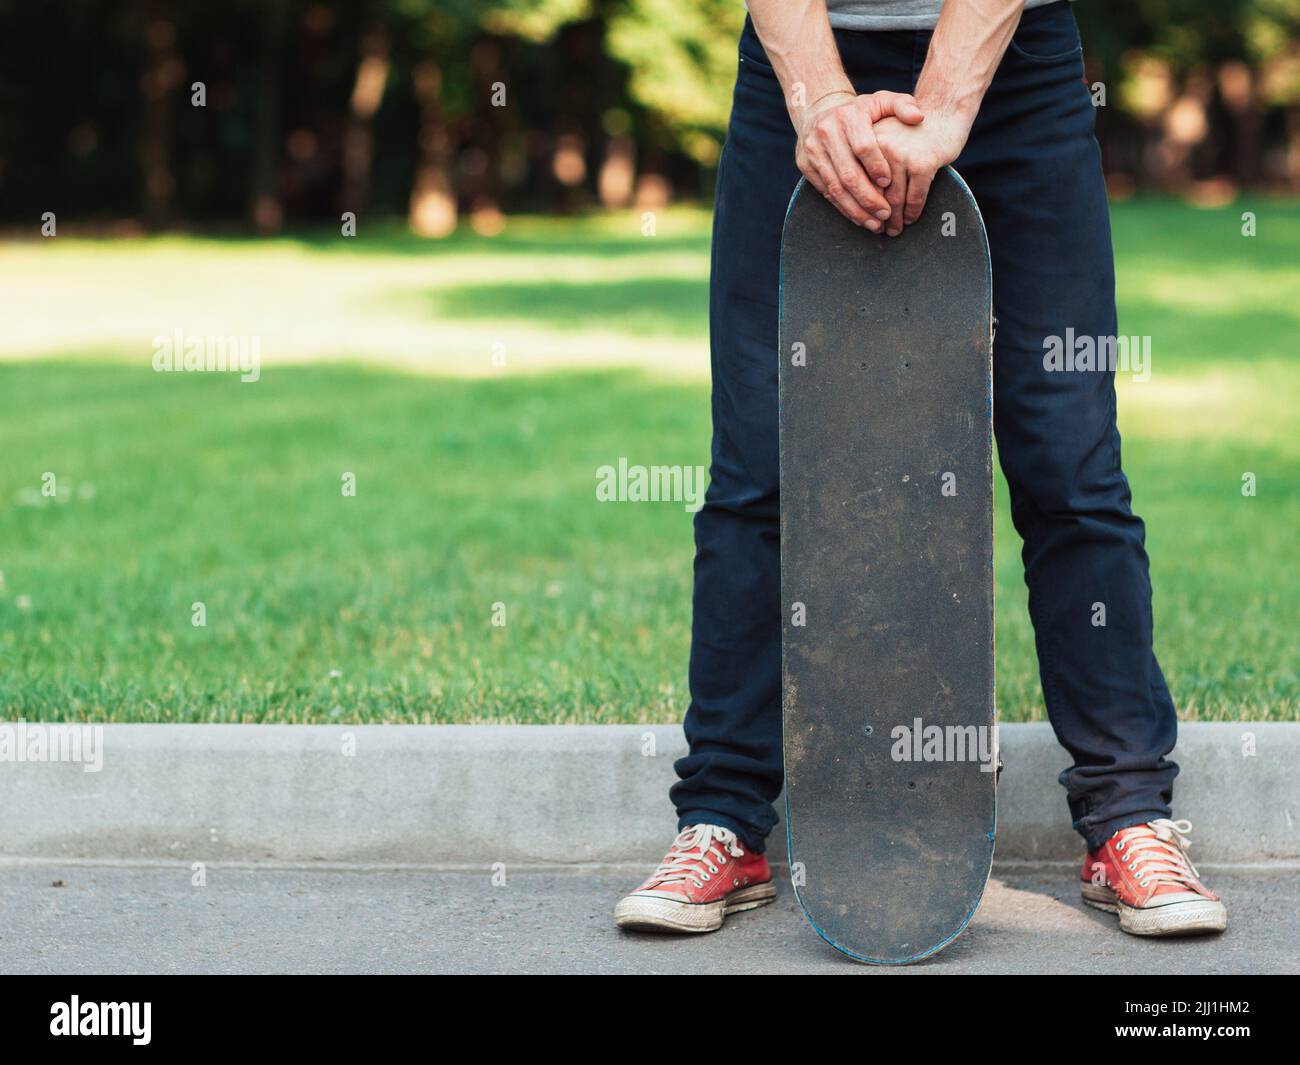 Active adult. Summer sport background at park Stock Photo